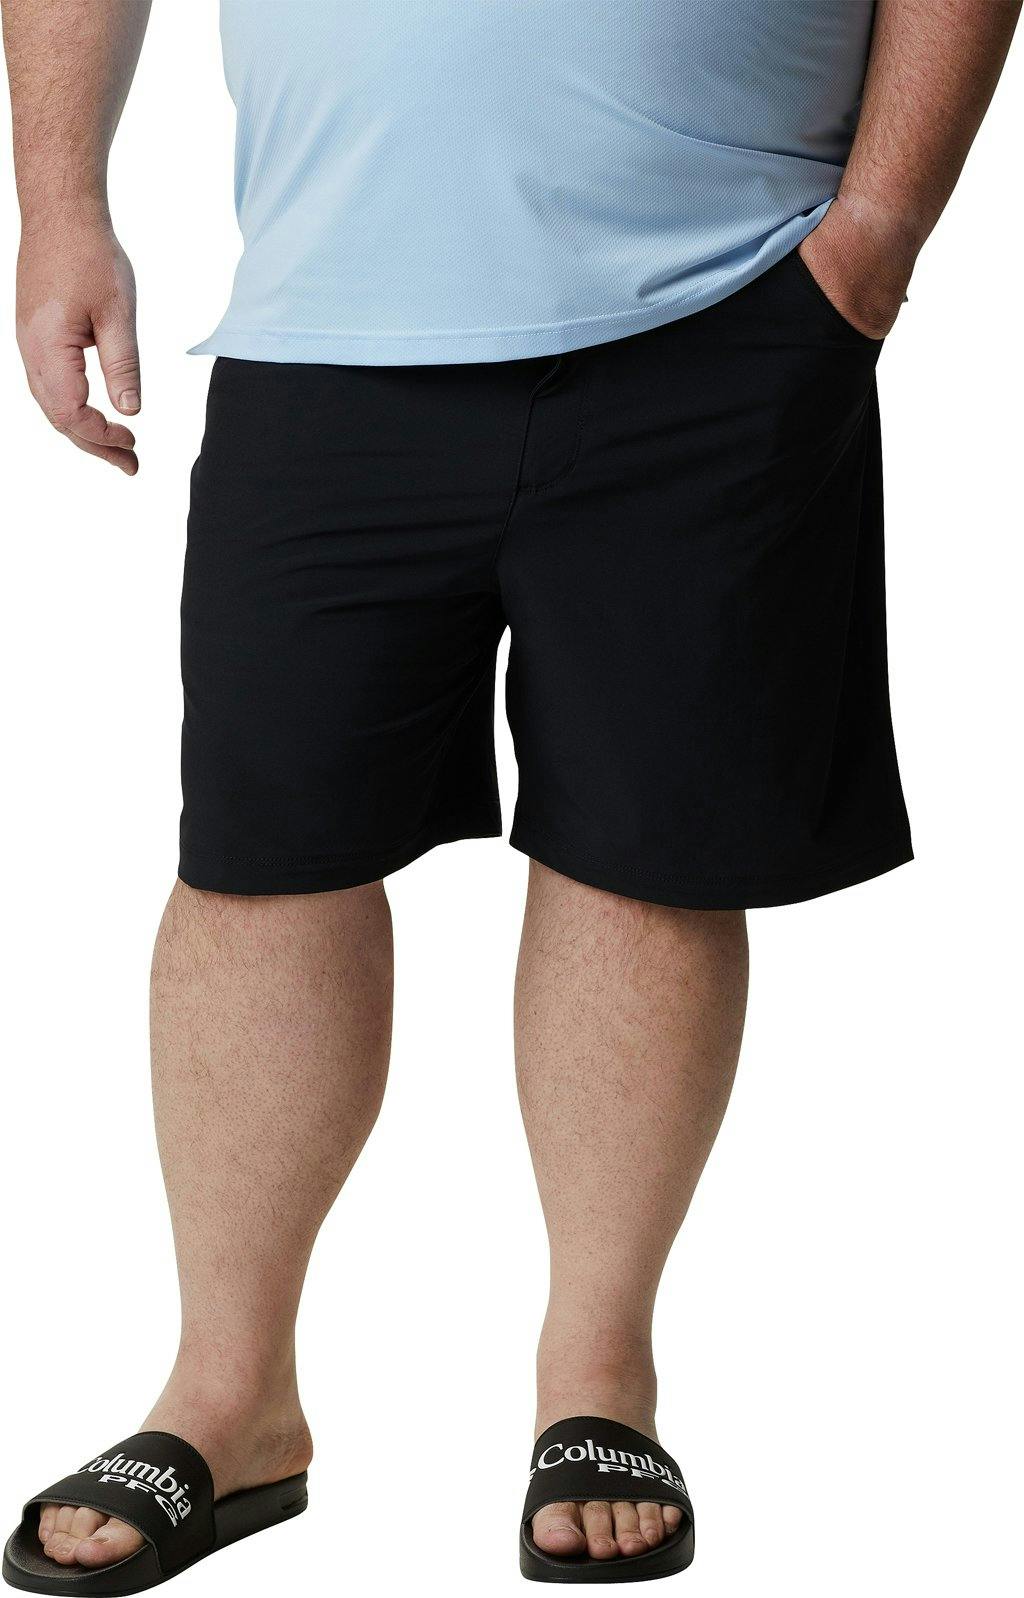 Product image for Outdoor Elements 5 pocket Shorts - Men's